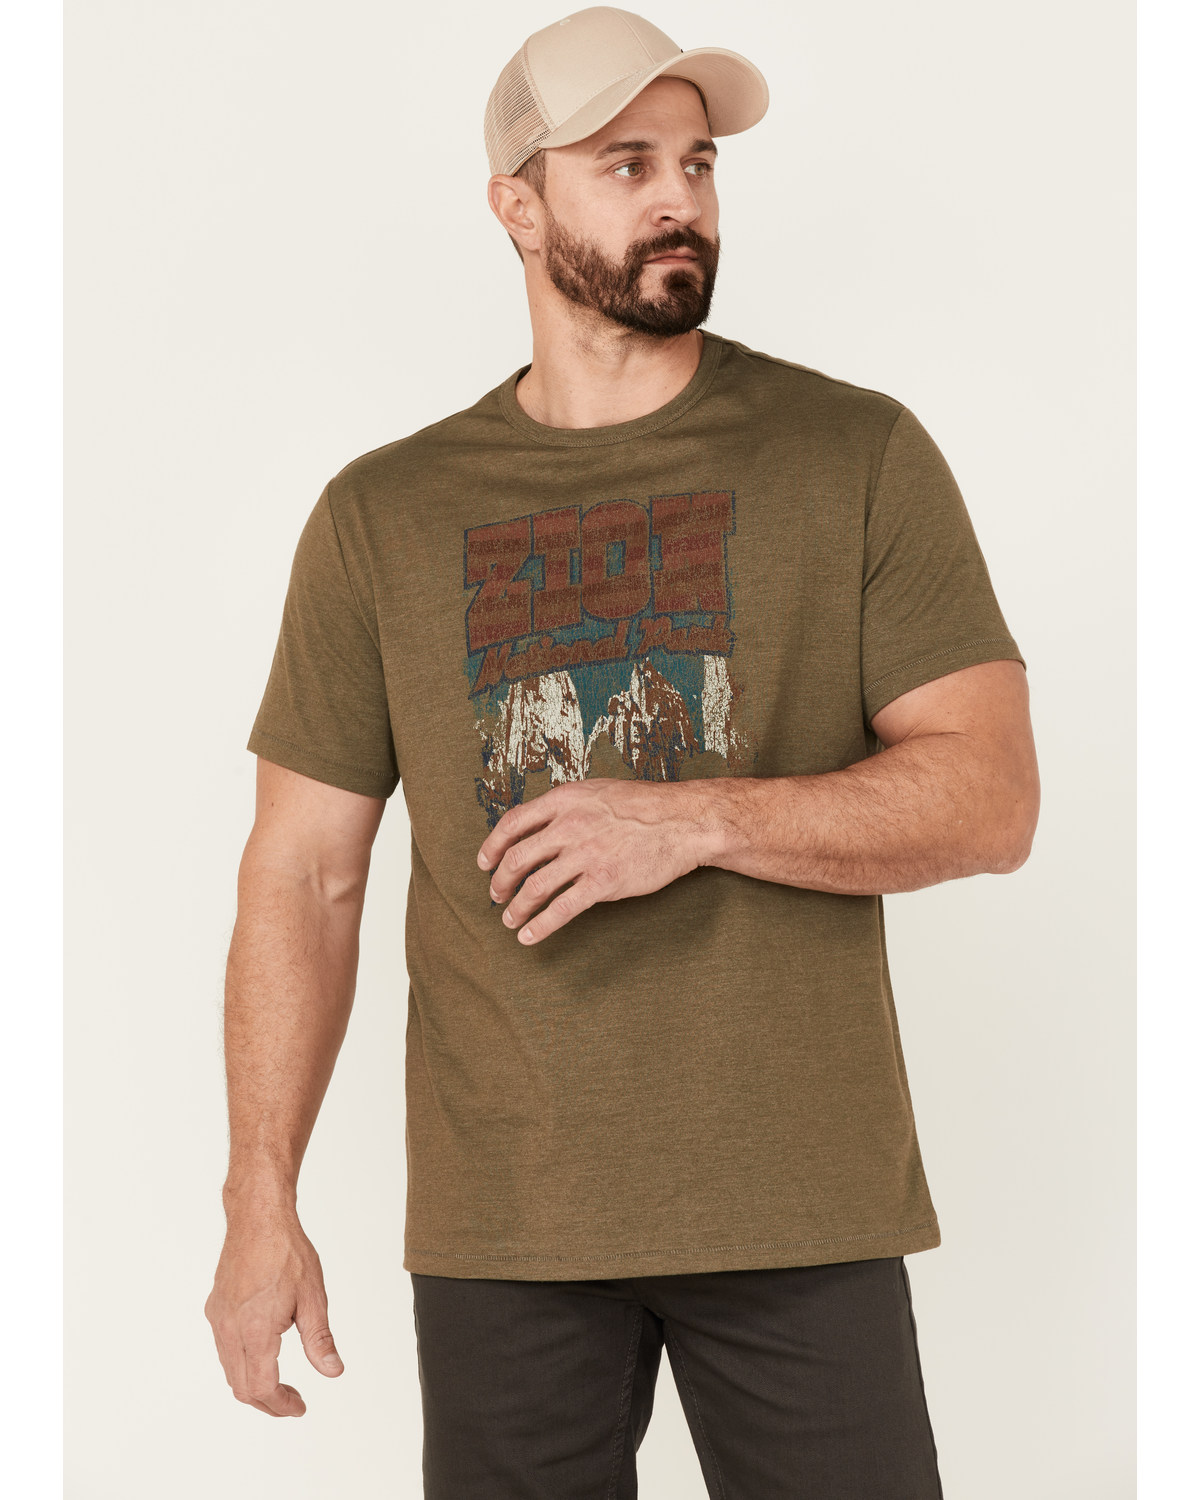 Brothers and Sons Men's Olive Zion National Park Graphic Short Sleeve T-Shirt